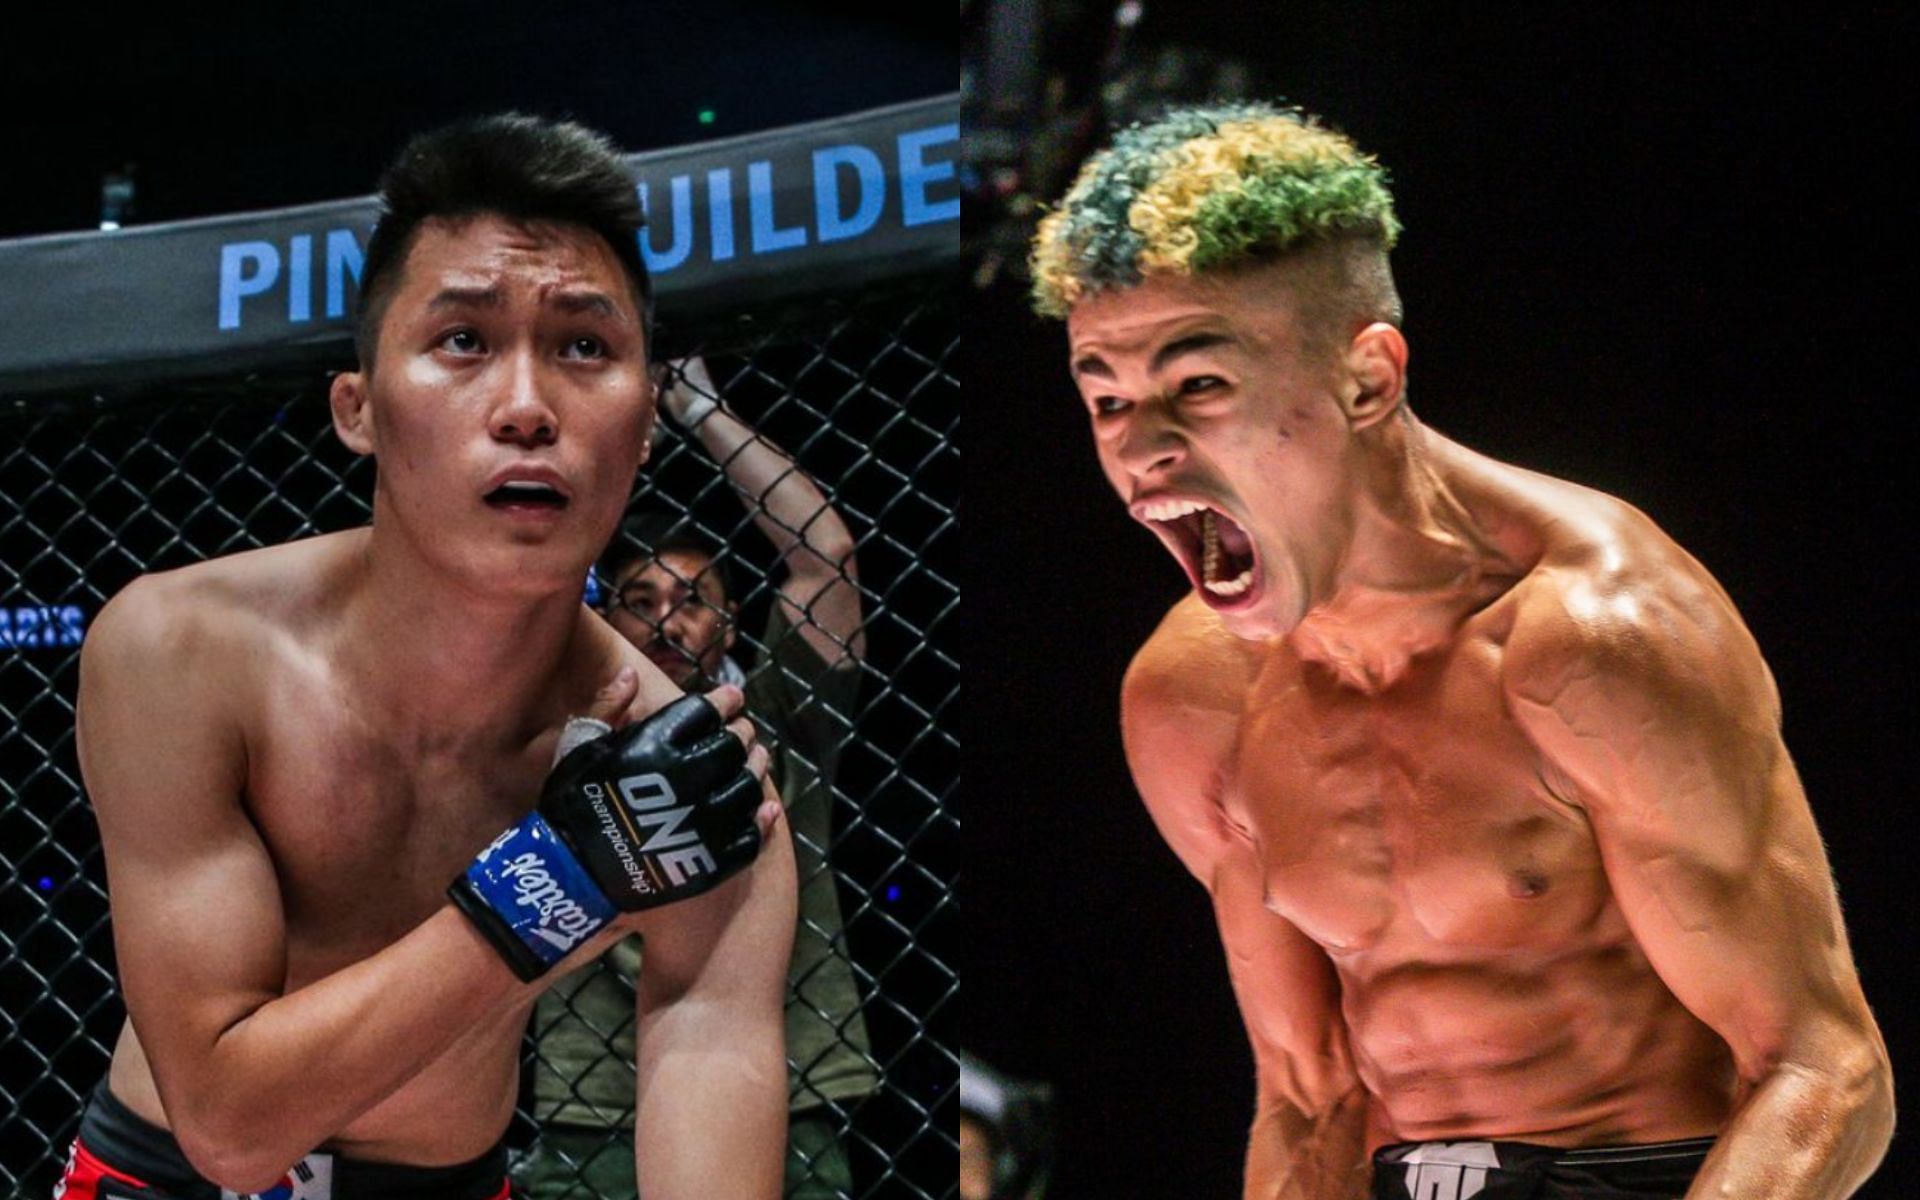 Kwon Won Il (left) says he&#039;s puzzled with Fabricio Andrade&#039;s (right) trash talk. [Photos ONE Championship]